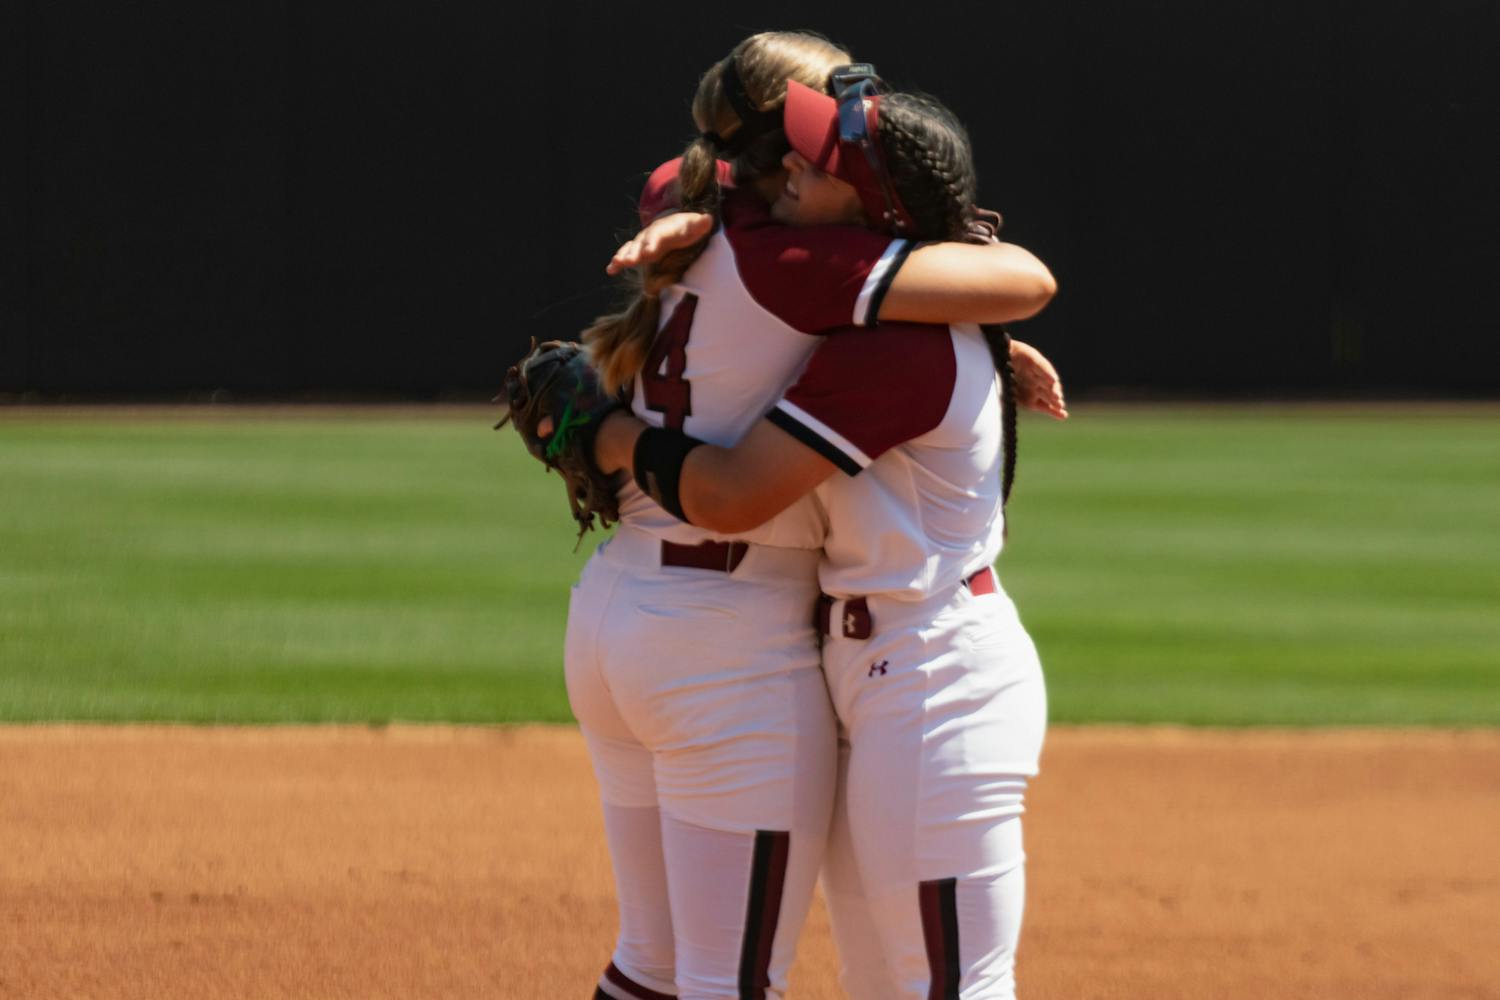 Sophomore infielder Emma Sellers and fifth-year catcher and infielder Jordan Fabian hug before the start of the first game against Charleston Southern at Beckham Field on April 19, 2023. The Gamecocks beat the Buccaneers 5-0 and went on to sweep the doubleheader with an 11-2 victory later in the day.&nbsp;